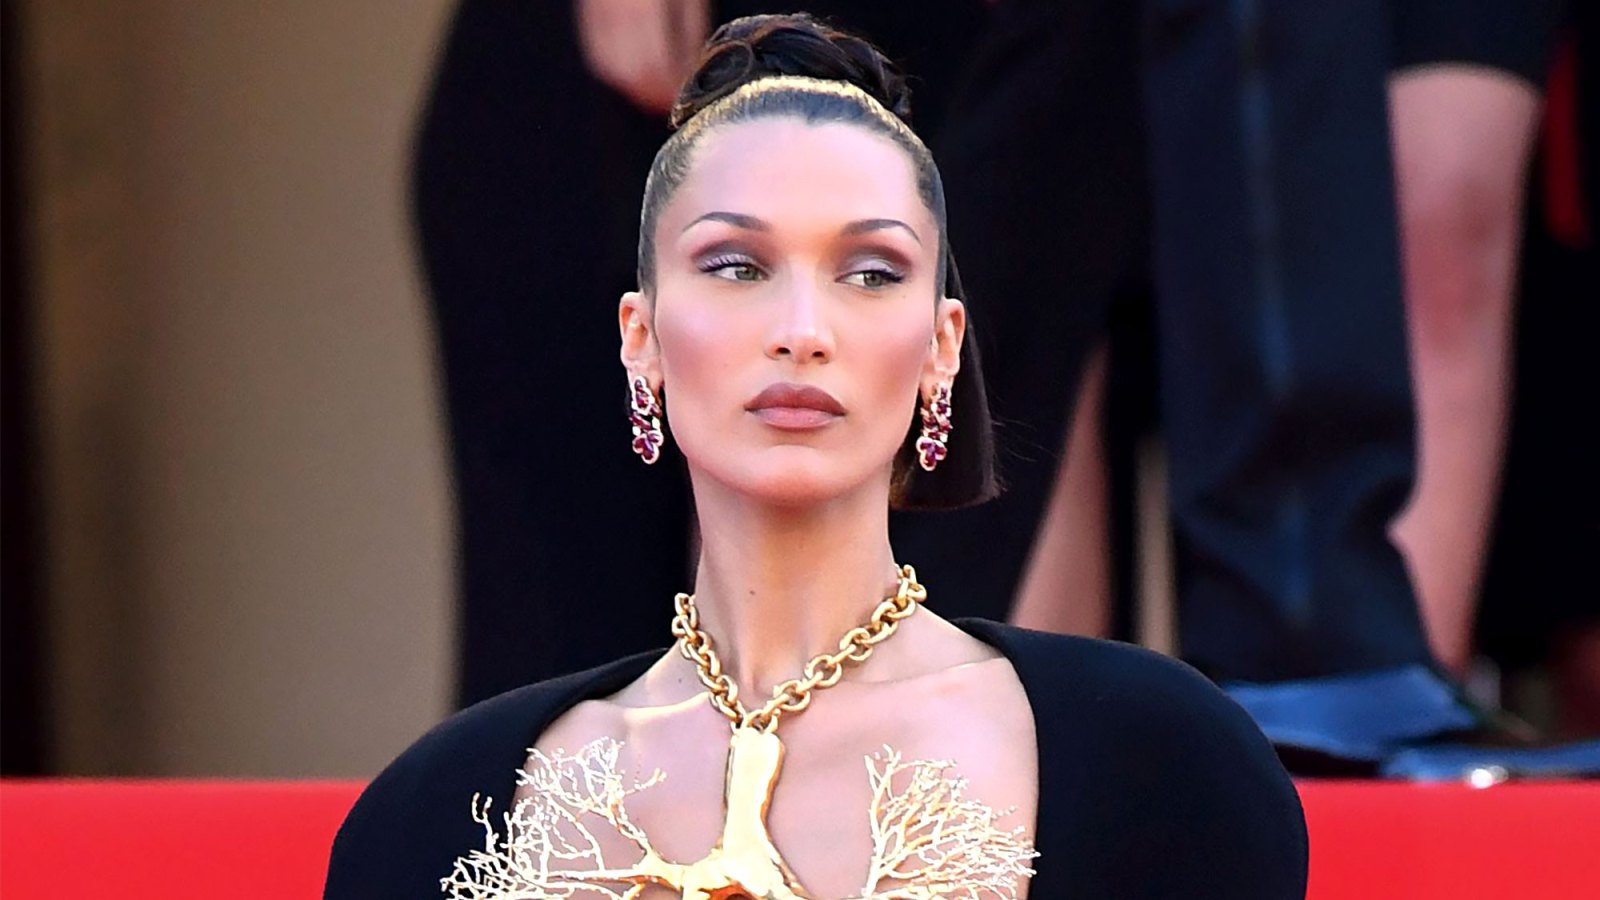 Bella Hadid Felt 'Enormous' Pressure to Have a 'Sexbot' Image as Teen Model 